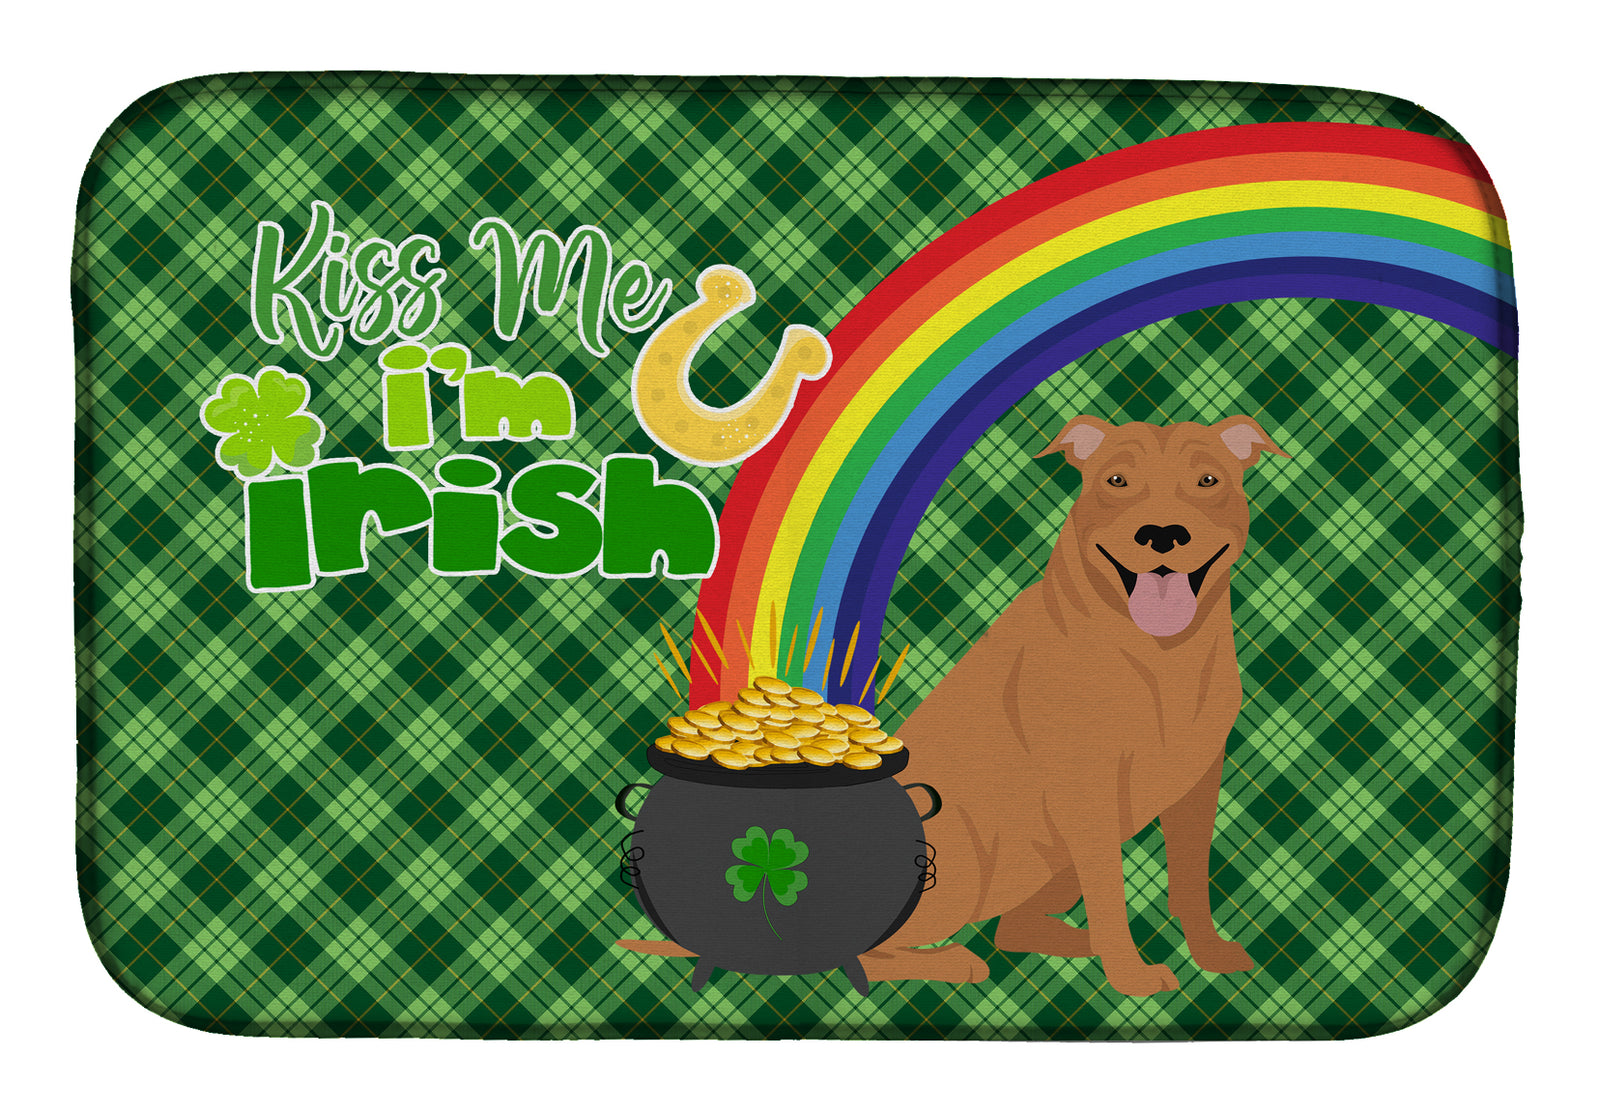 Red Pit Bull Terrier St. Patrick's Day Dish Drying Mat